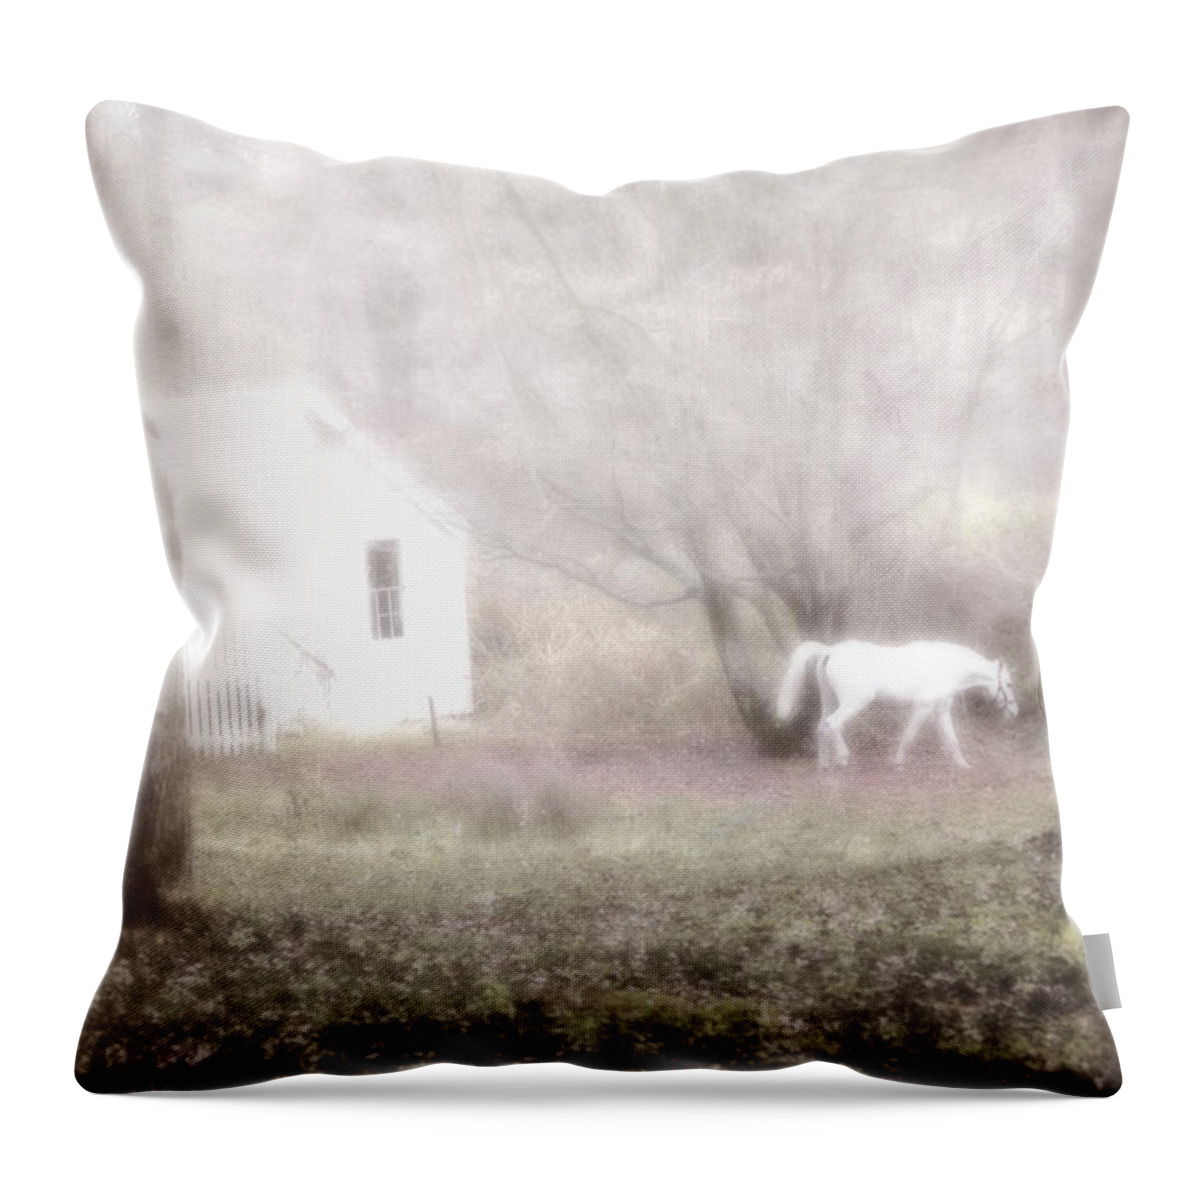 White Horse Throw Pillow featuring the photograph Dream Horse by Marianne Campolongo